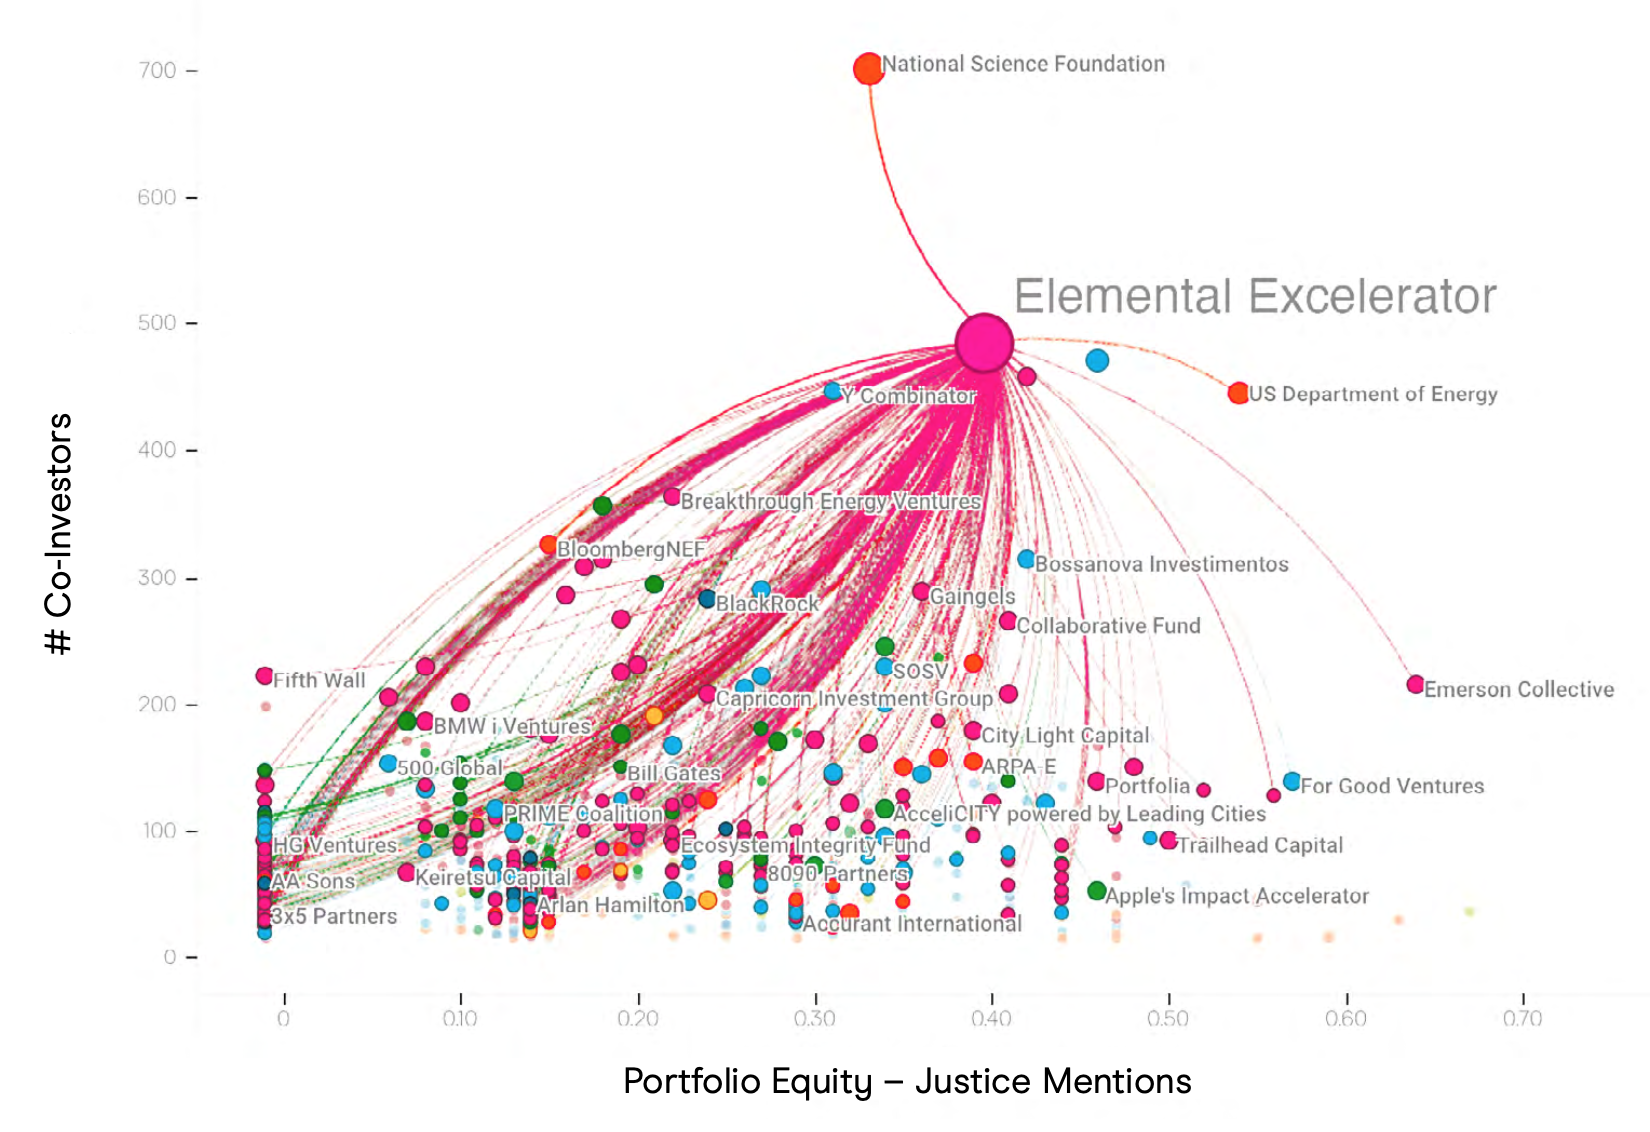 Climate Finance Tracker mapped investors by number of co-investors and equity/justice mentions.